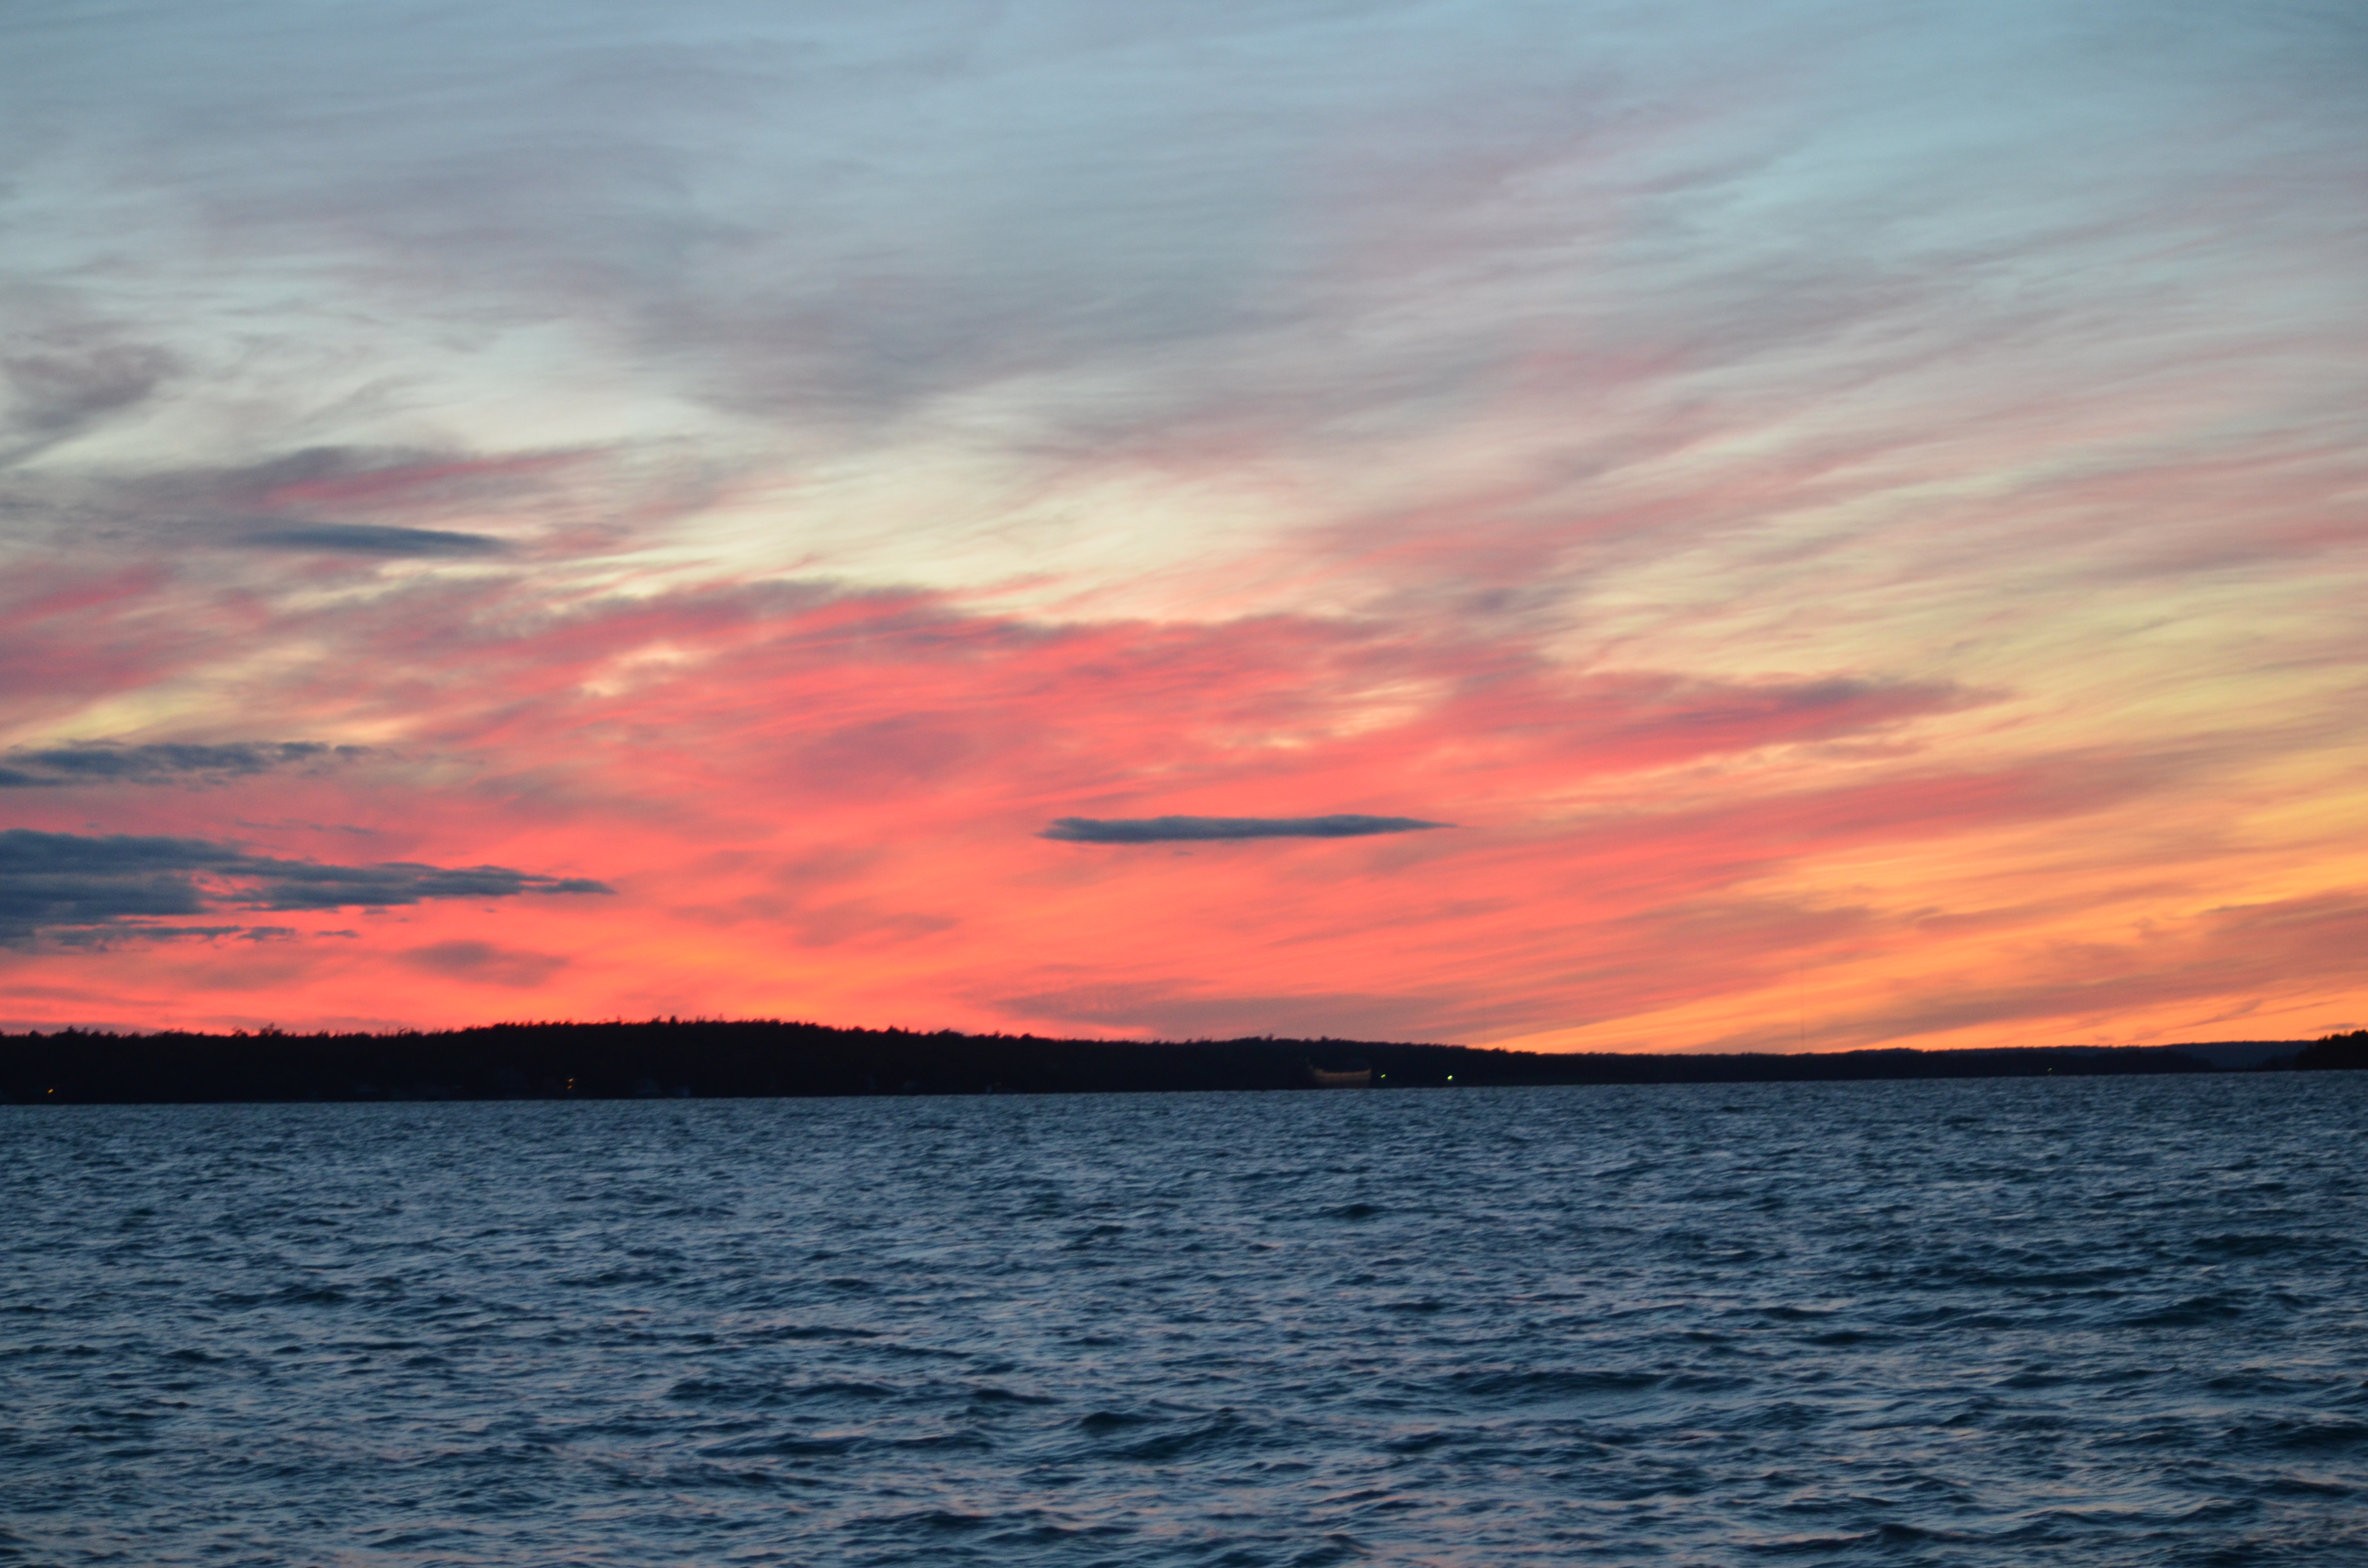 Sunset on the St. Mary's River, Drummond Island, September